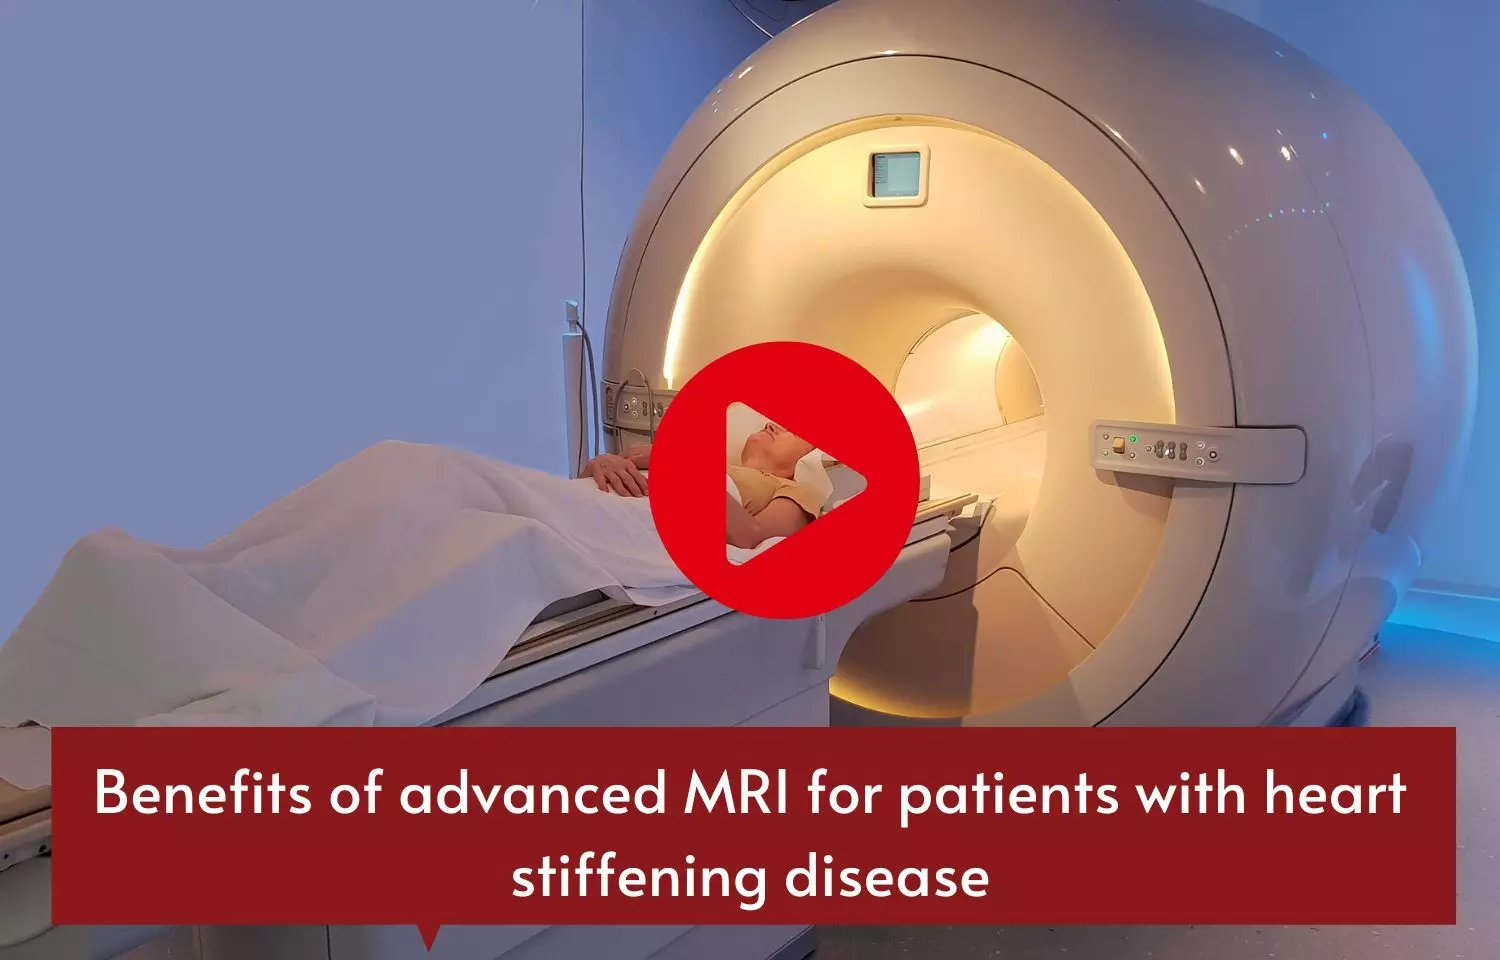 Benefits of advanced MRI for patients with heart stiffening disease